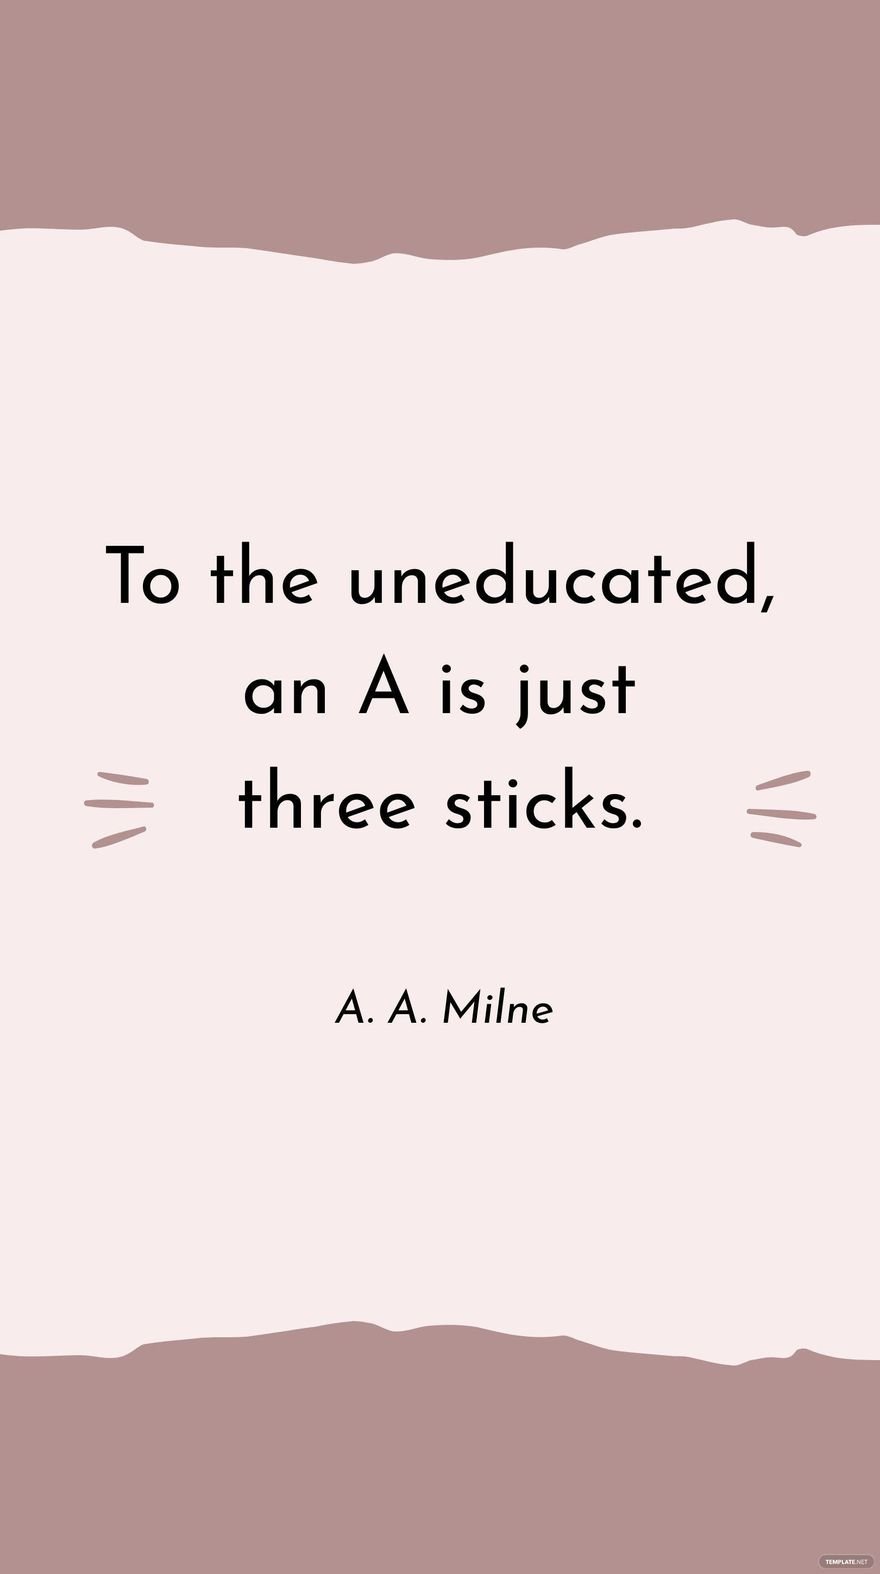 Free A. A. Milne - To the uneducated, an A is just three sticks. in JPG